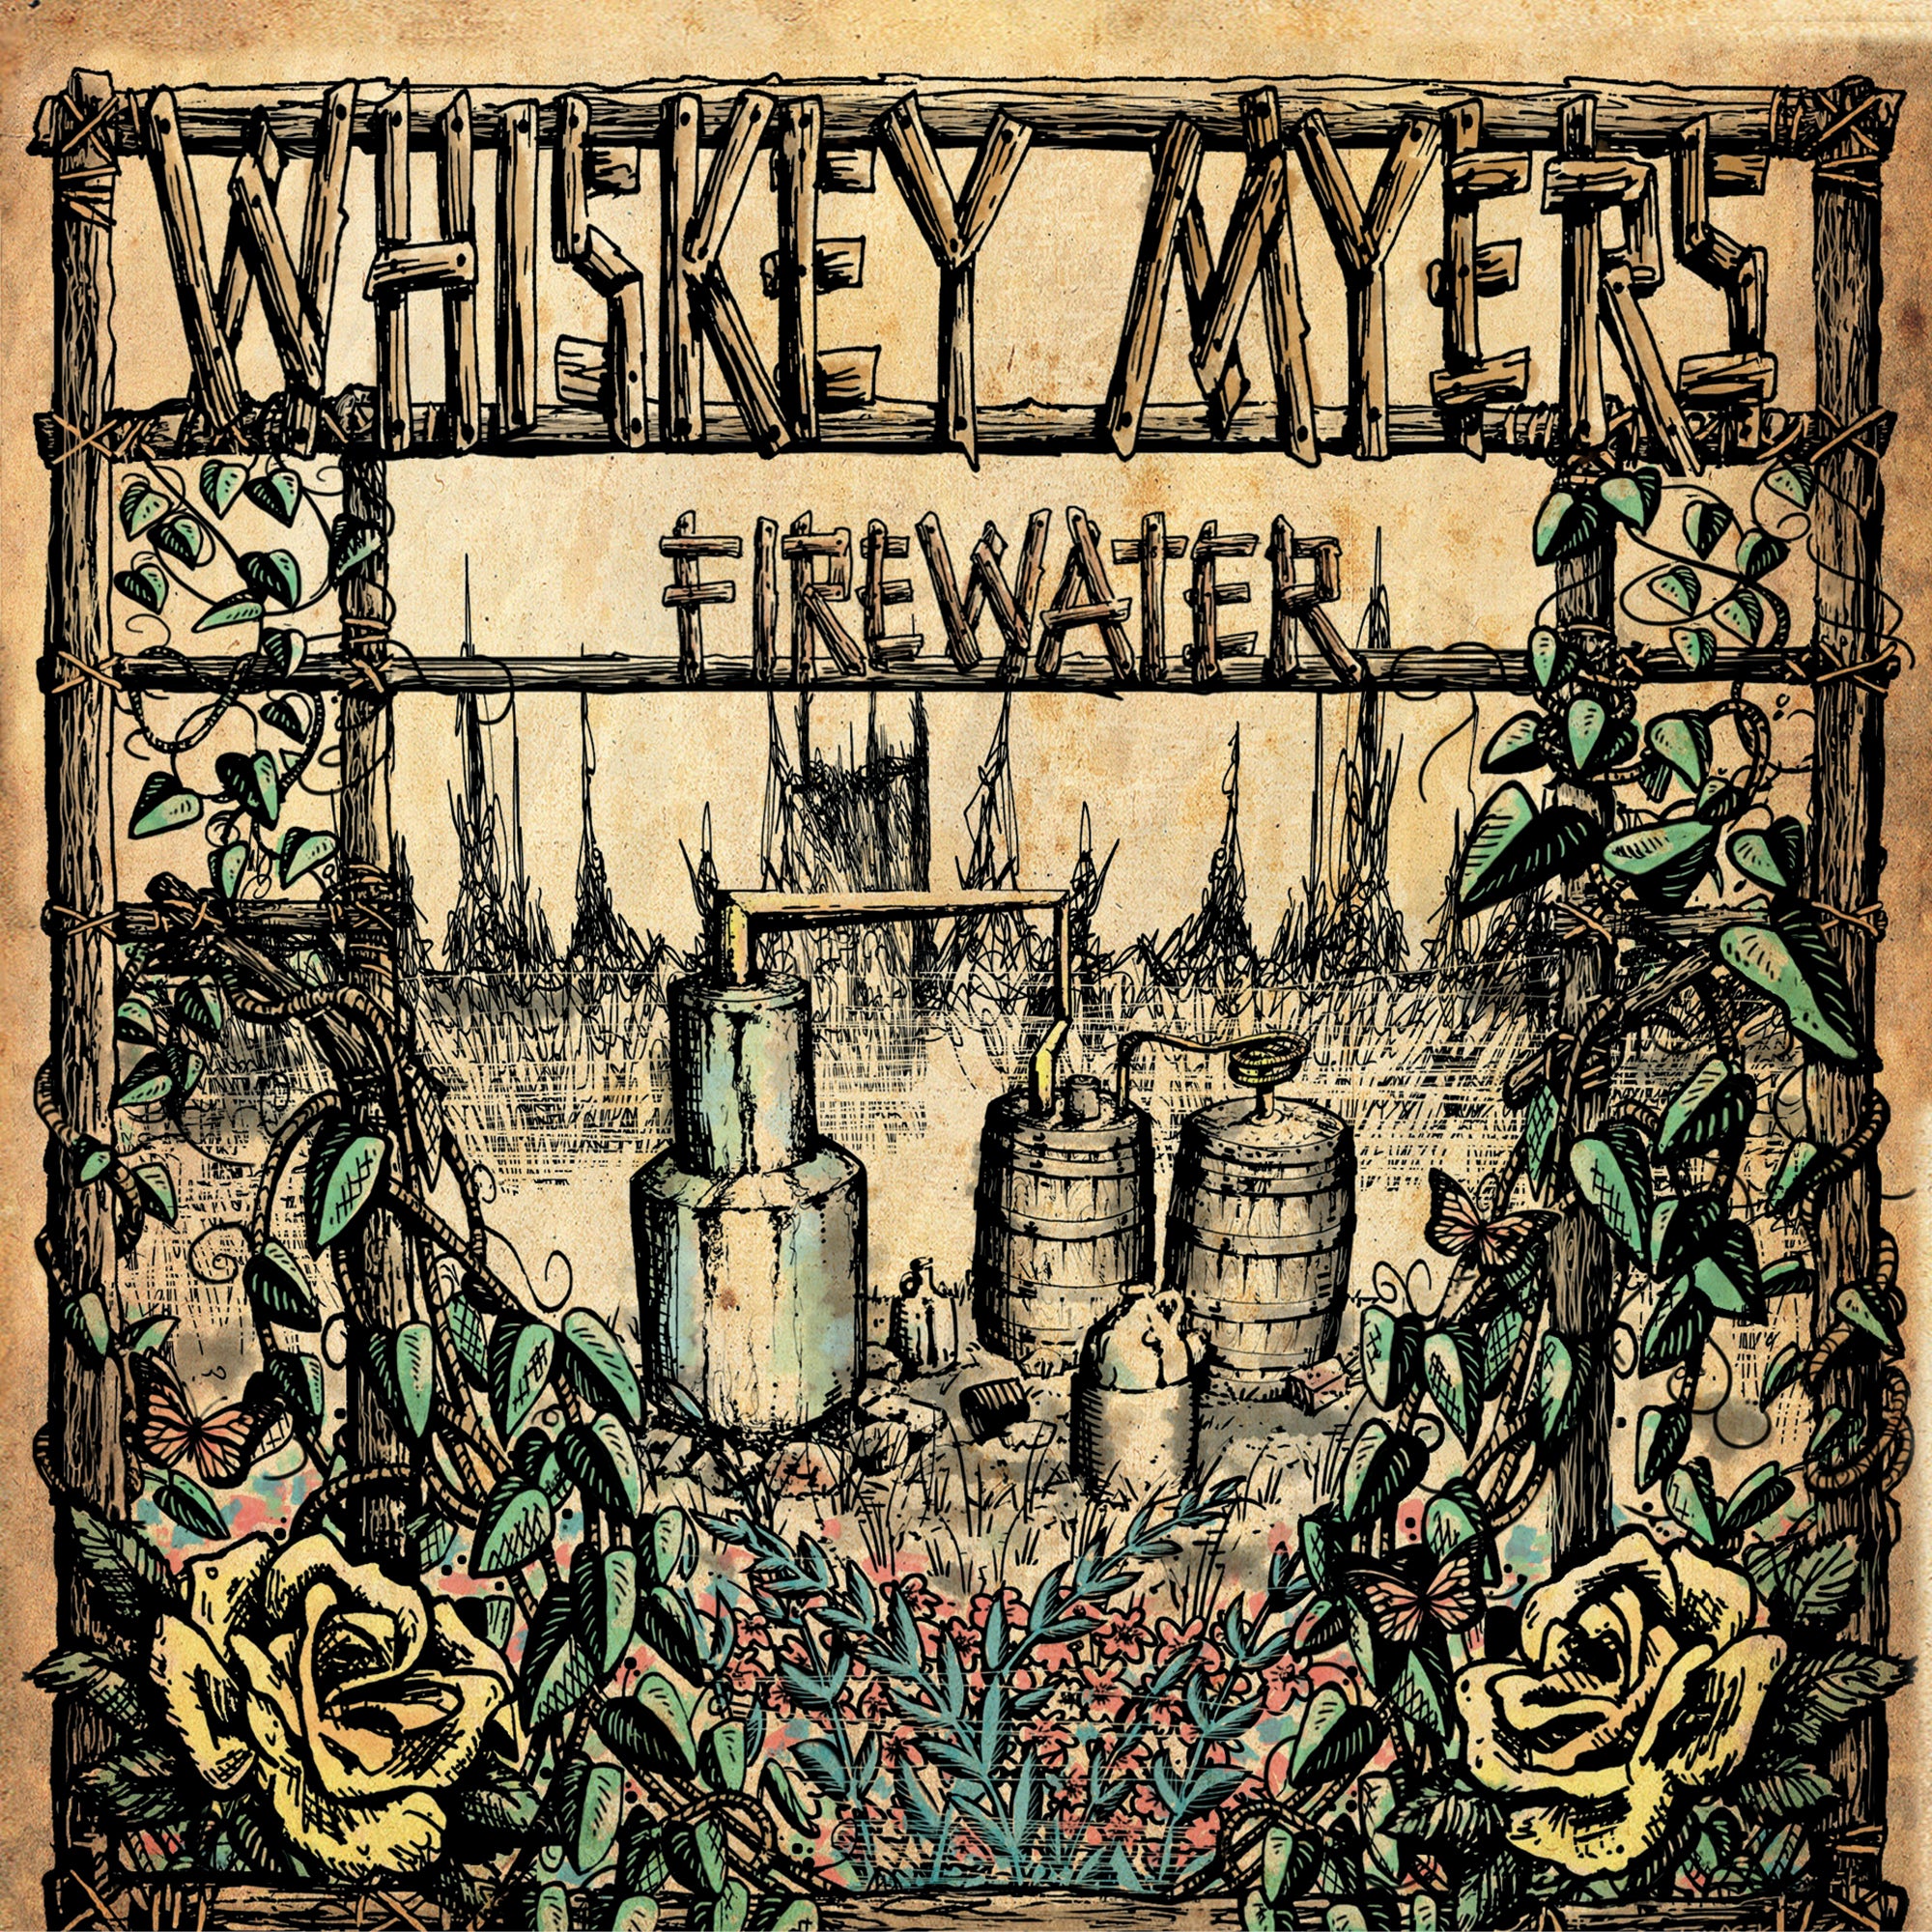 WHISKEY MYERS - Firewater - 2LP Limited Edition [RSD2020-AUG29]